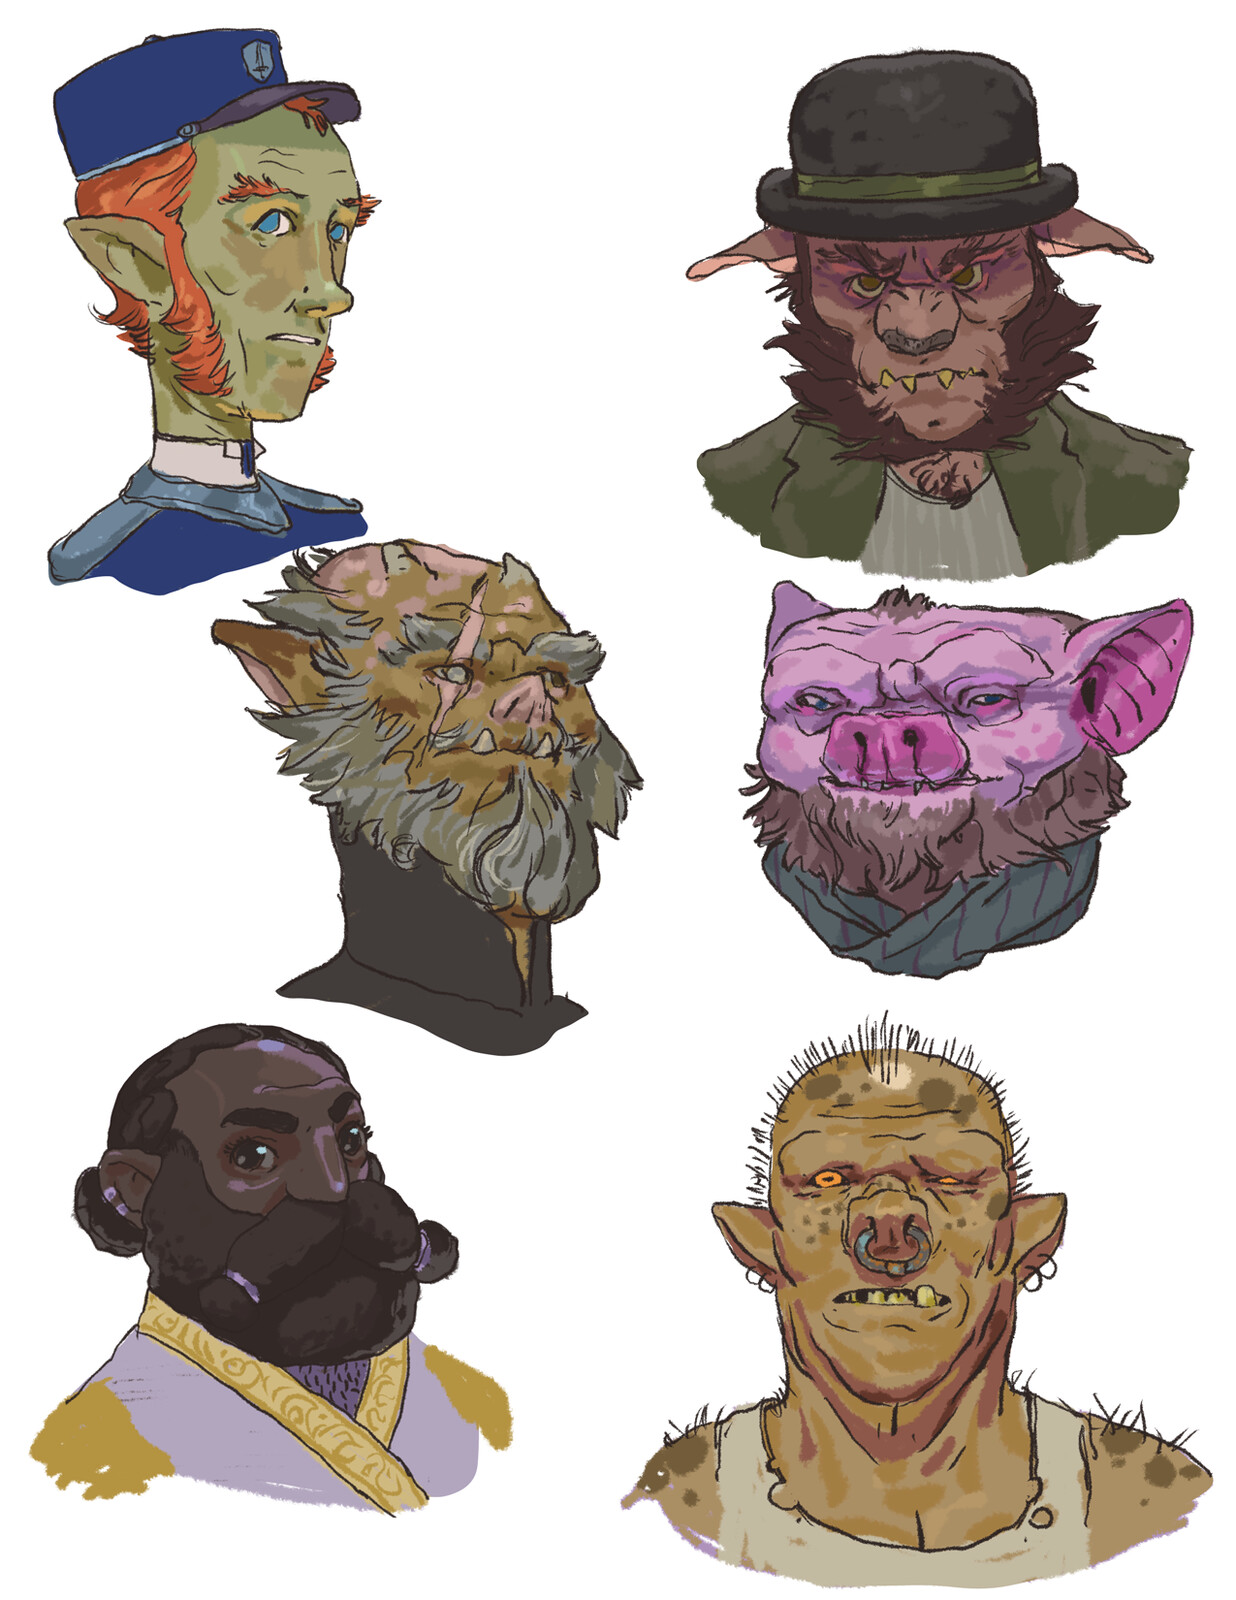 Portraits of NPCs and enemies the players could encounter in the adventure